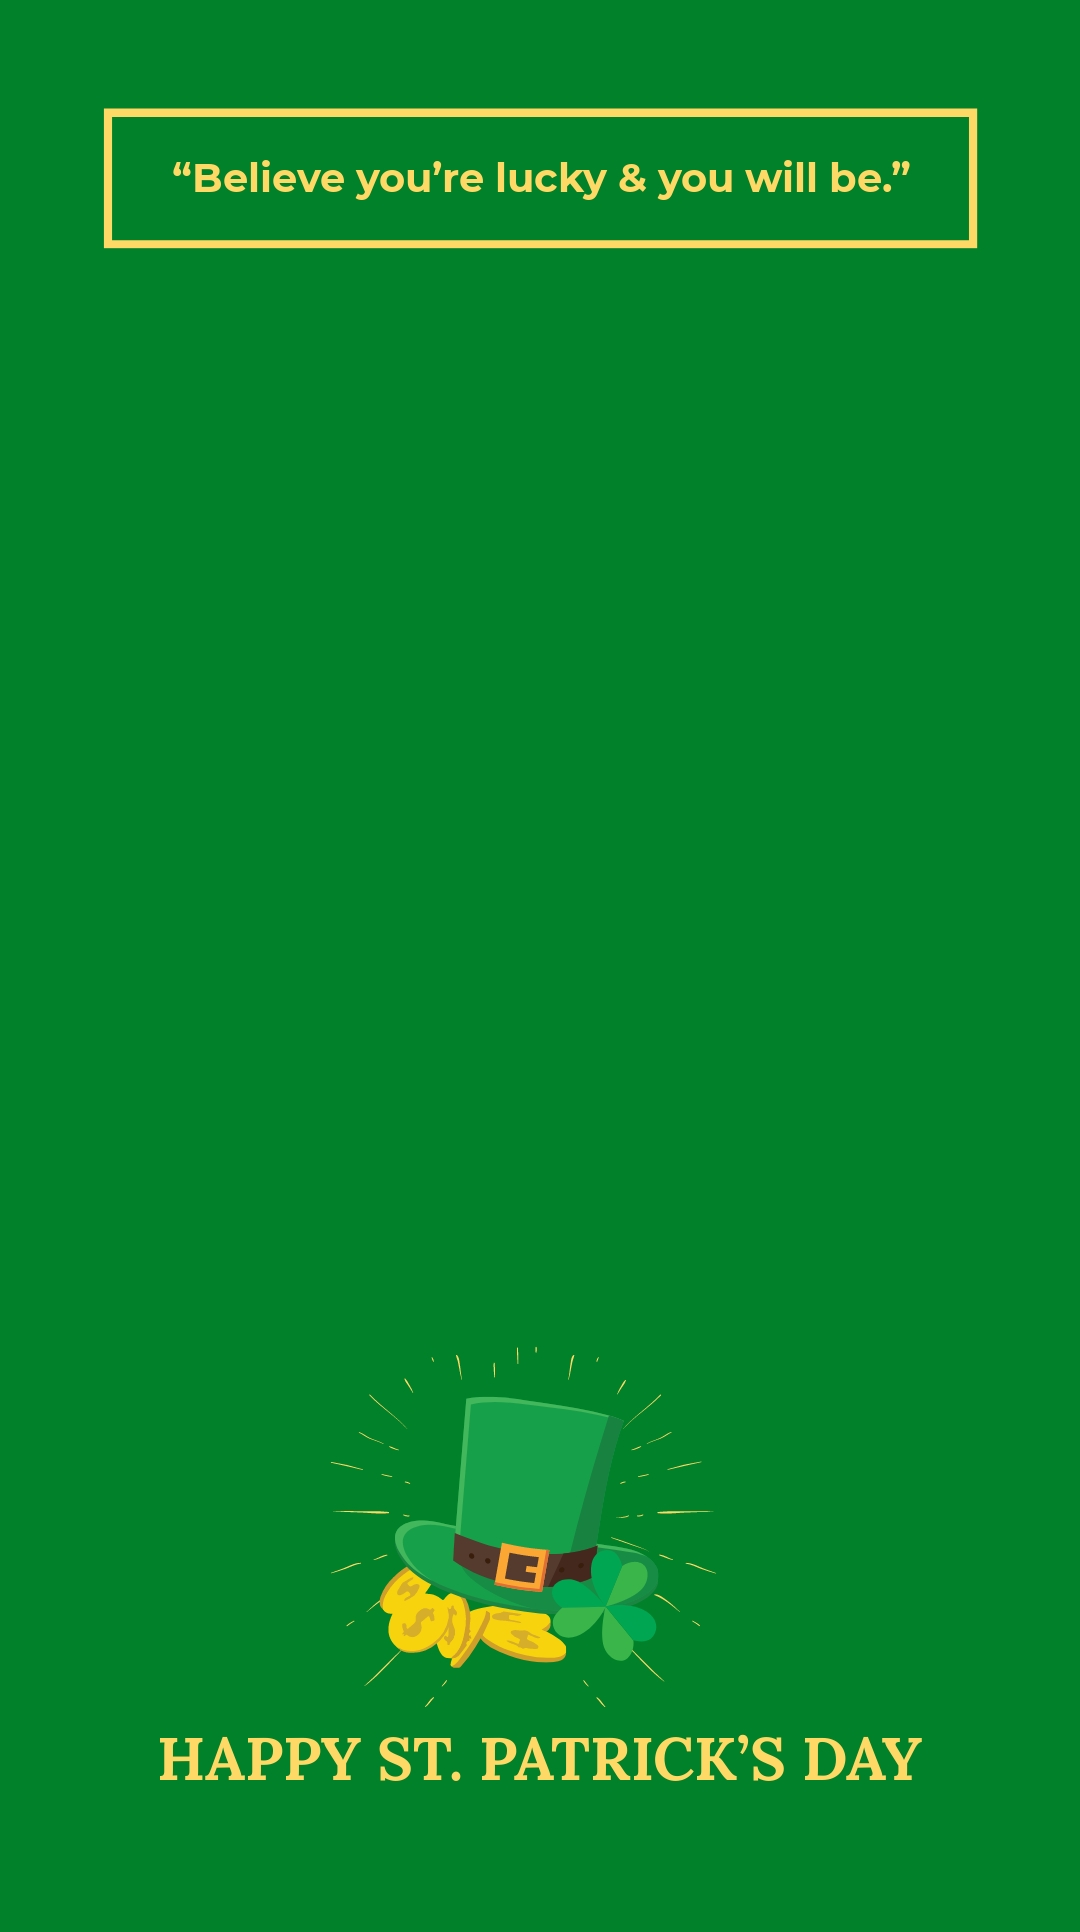 Free St. Patricks Day Quote Snapchat Geofilter Template